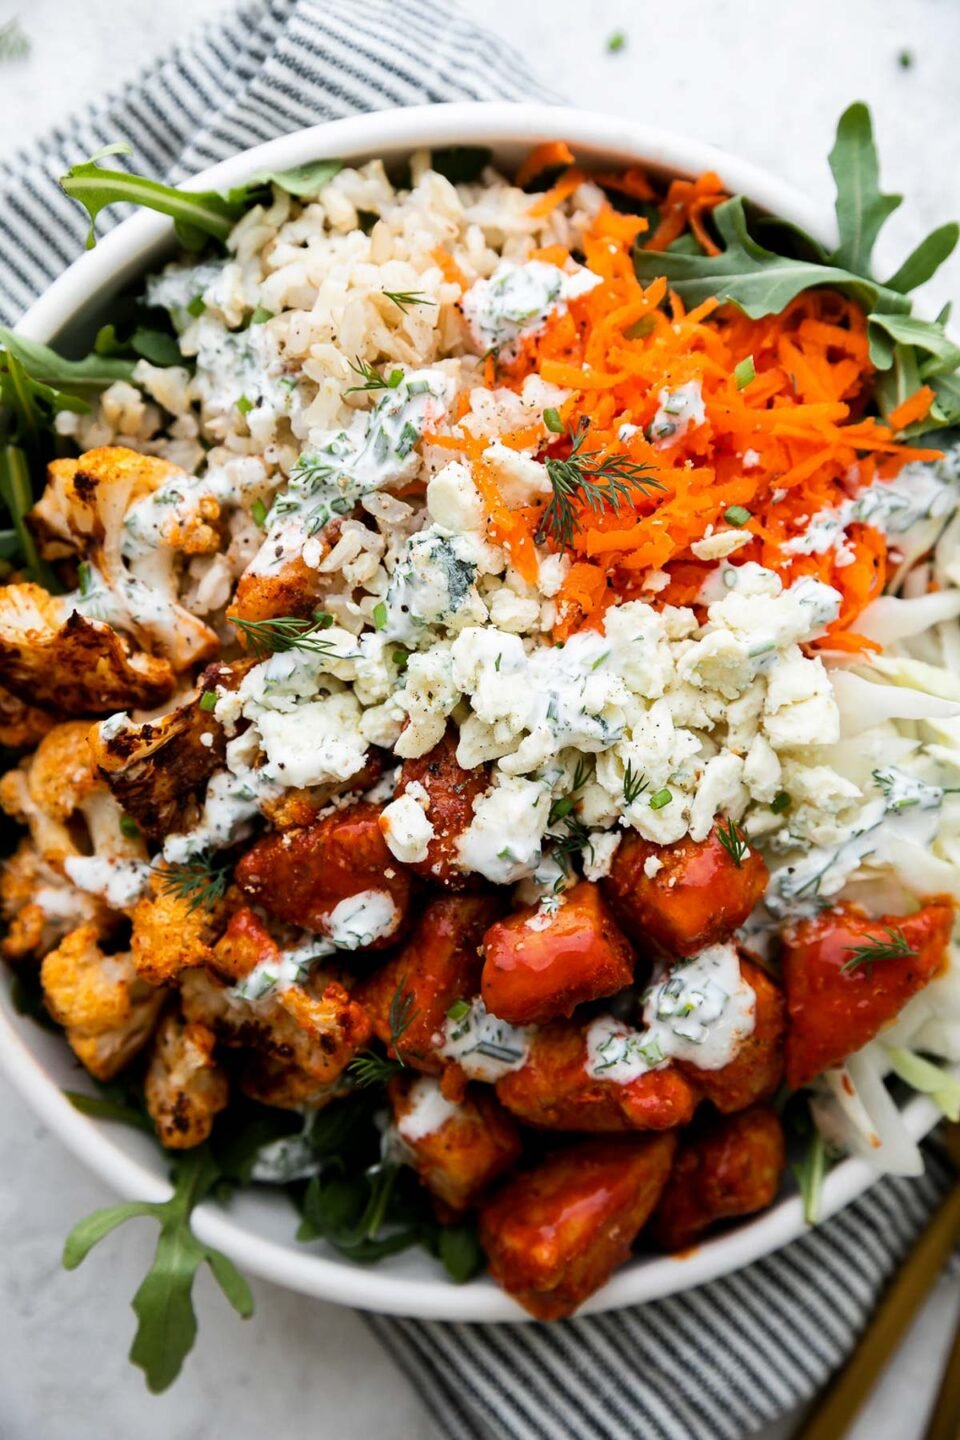 An overhead shot of an assembled & finished Hearty Buffalo Chicken bowl. The bowl is made with cooked brown rice, a bed of arugula, finely shredded cabbage, easy skillet buffalo chicken, roasted cauliflower, grated carrots, cheese, and herby ranch yogurt drizzle over top. The bowls sits atop a creamy white textured surface with a blue and white striped linen napkin resting underneath. Two gold forks rest alongside the bowl.